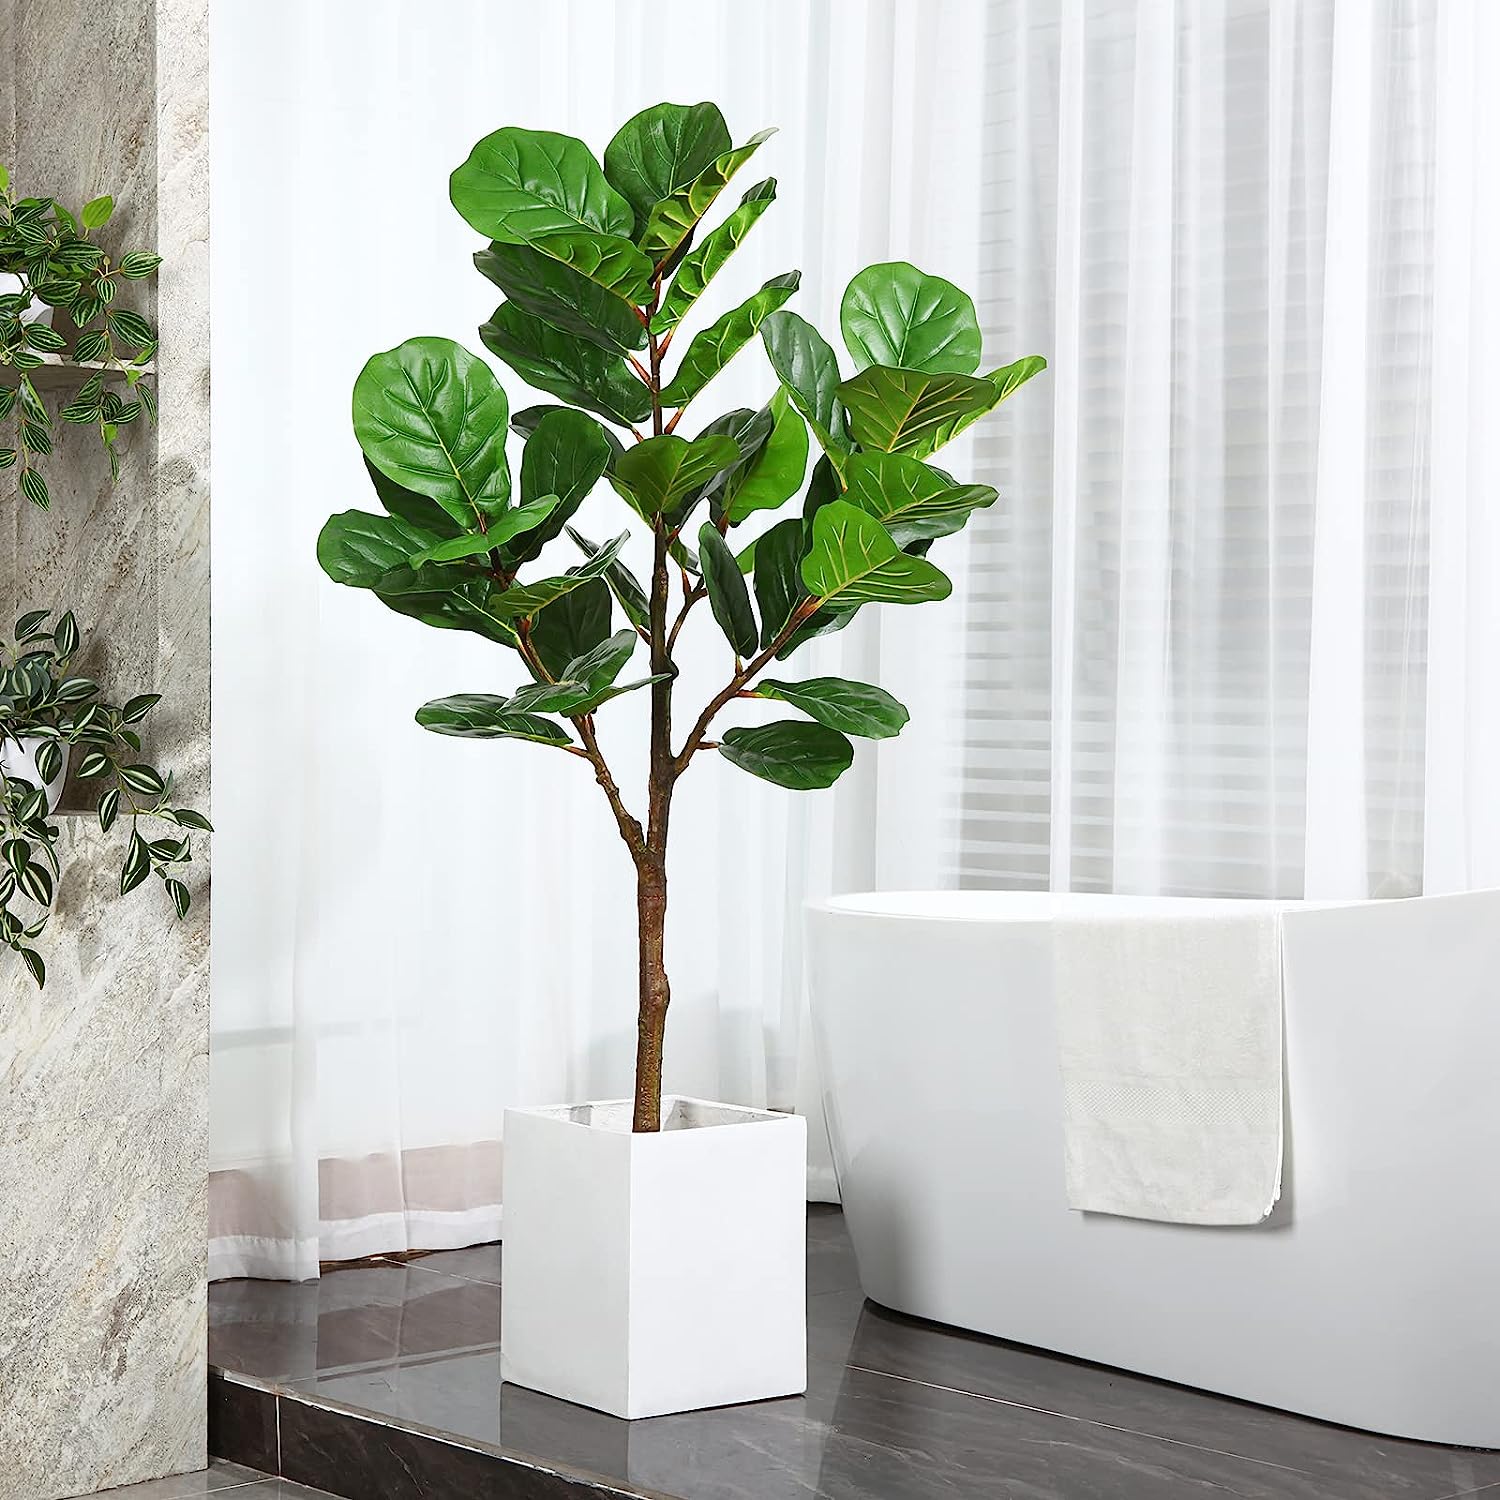 5 Feet Artificial fiddle leaf tree with 38 Leaves. Comes with Woven Seagrass Belly Basket Graceland Home and Living